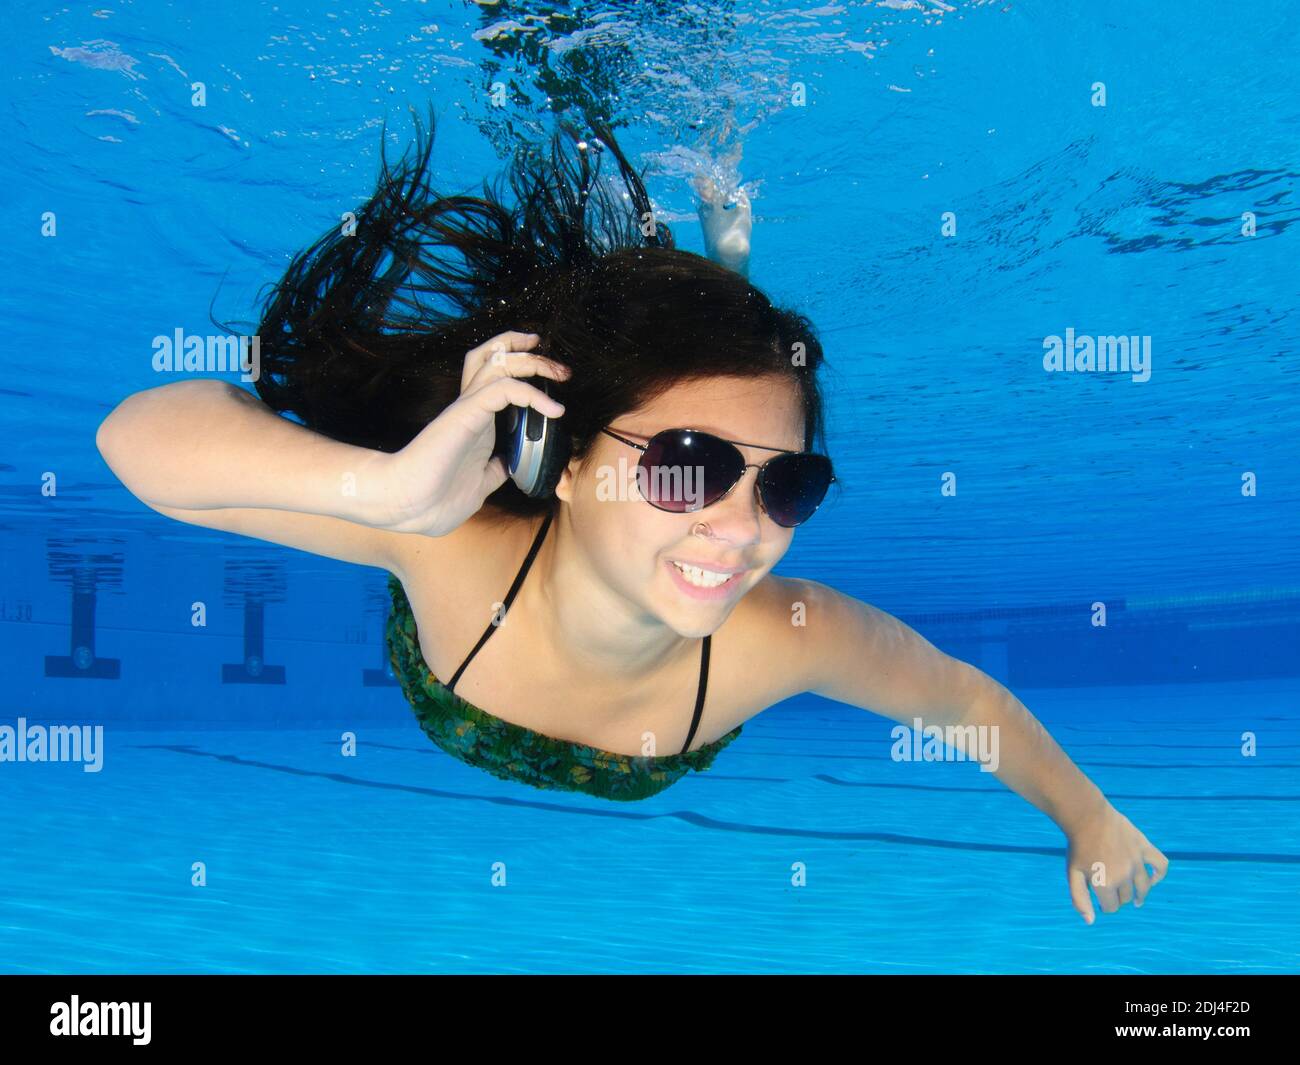 A dressed 12 year old female teen free diving underwater in a swimming pool with headphones and sunglasses. Model release available Stock Photo